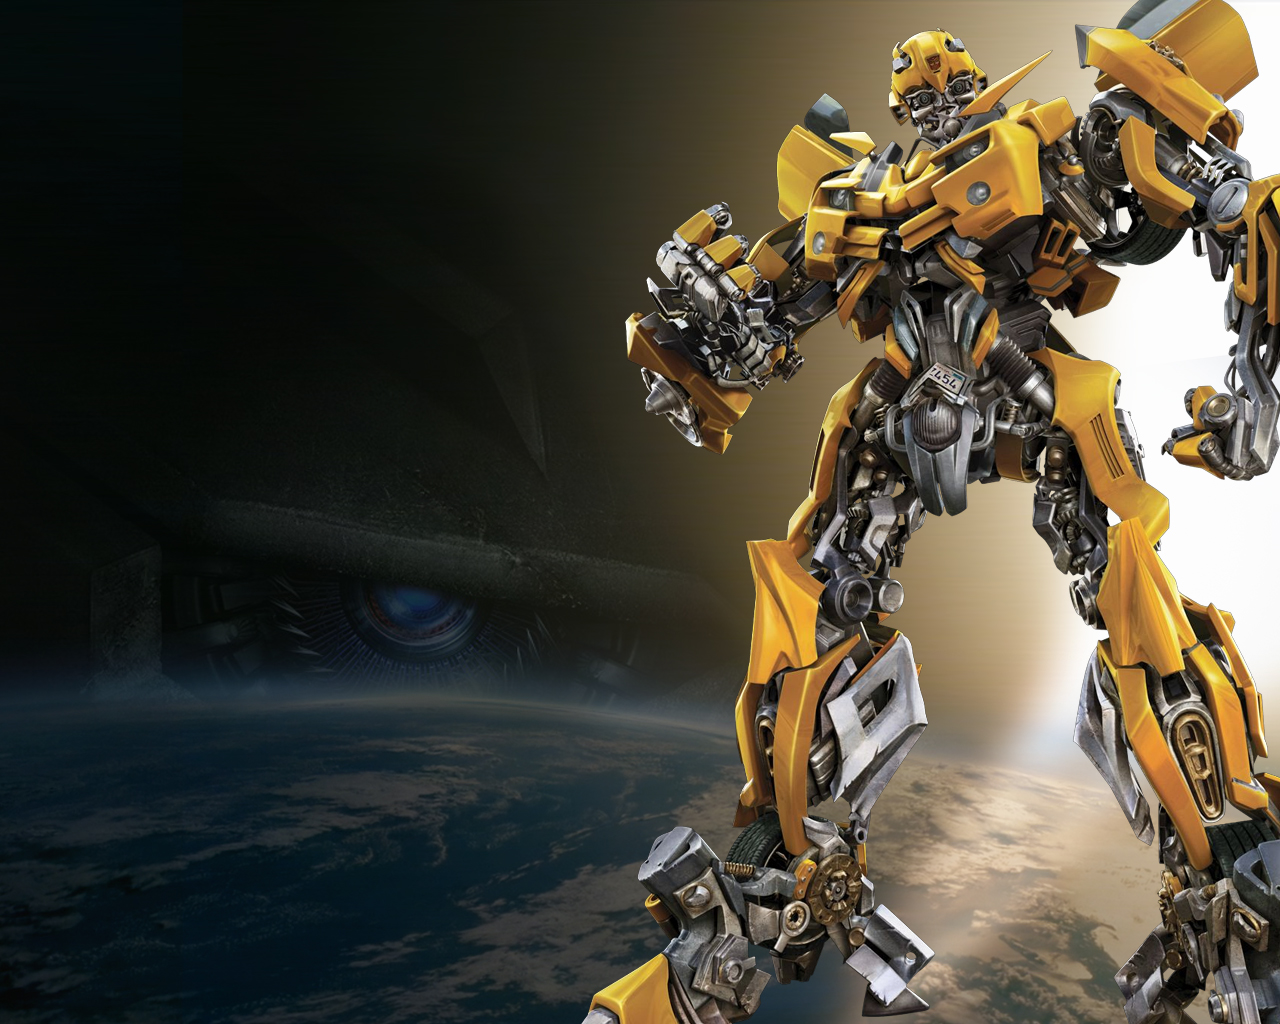 Transformers Wallpaper Photos Beautifully Pictured On